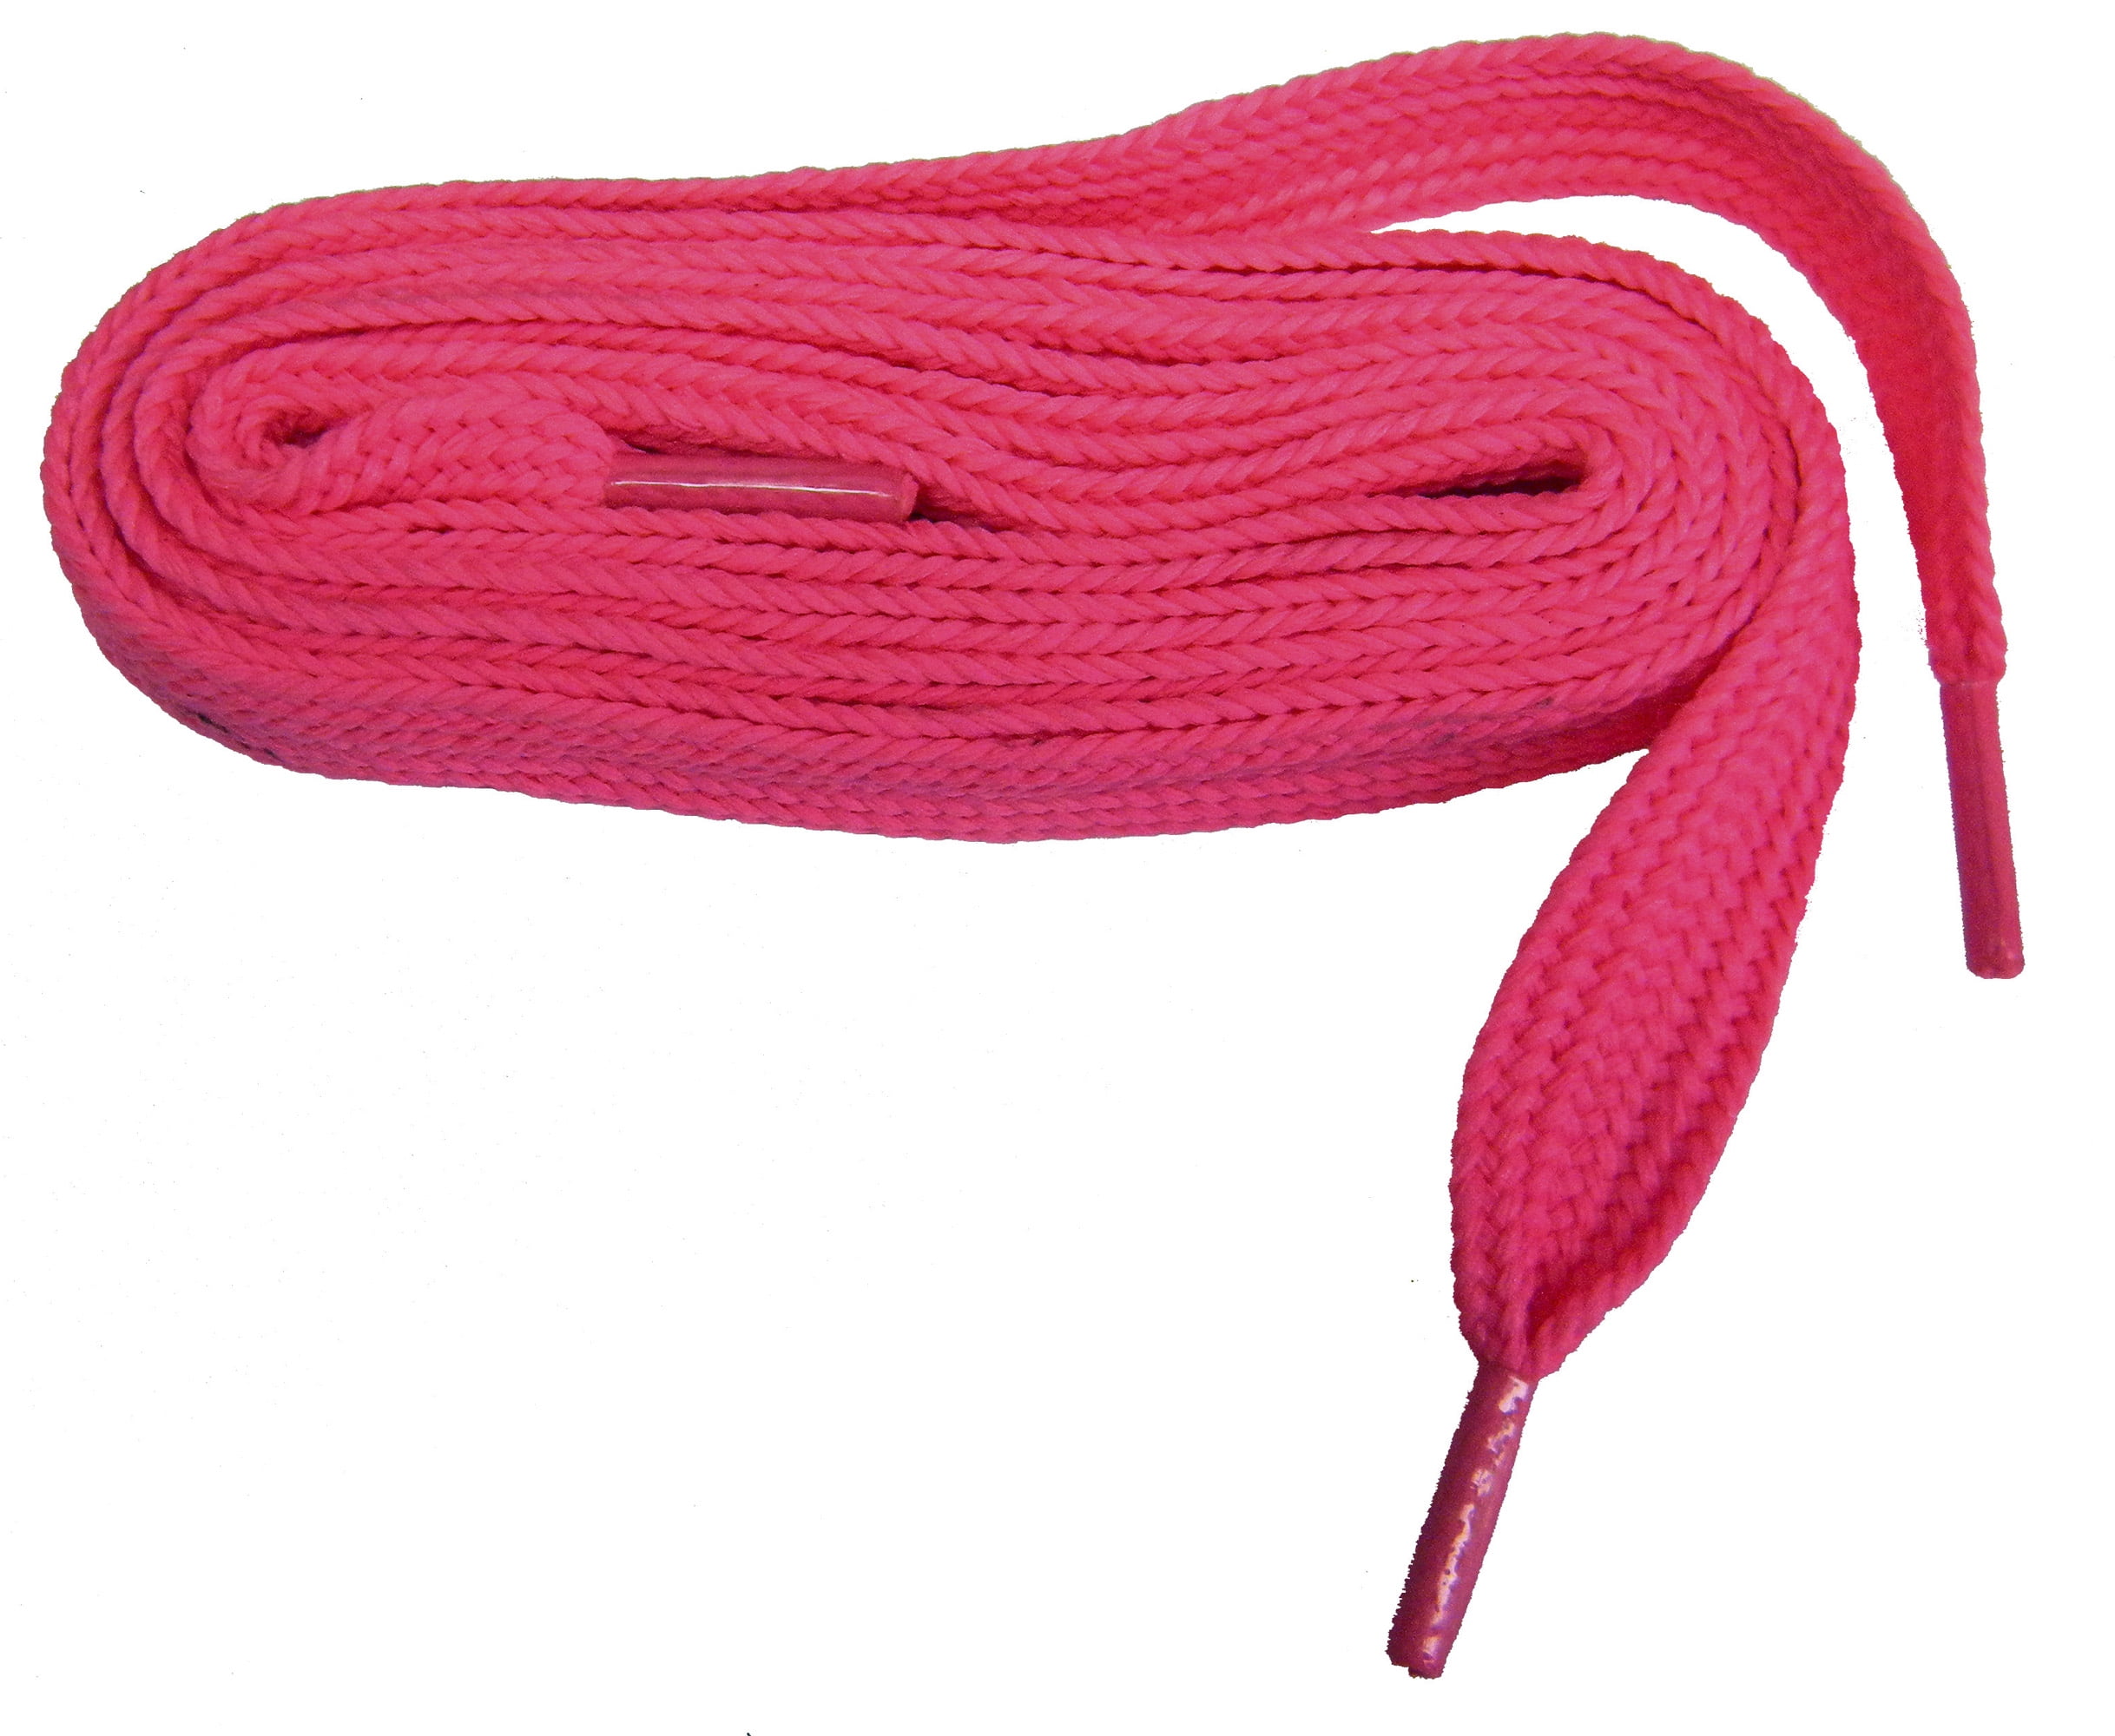 Shoe Laces Ovale 8 mm x 130 cm 2 pairs for £ 3.30 Fuchsia 